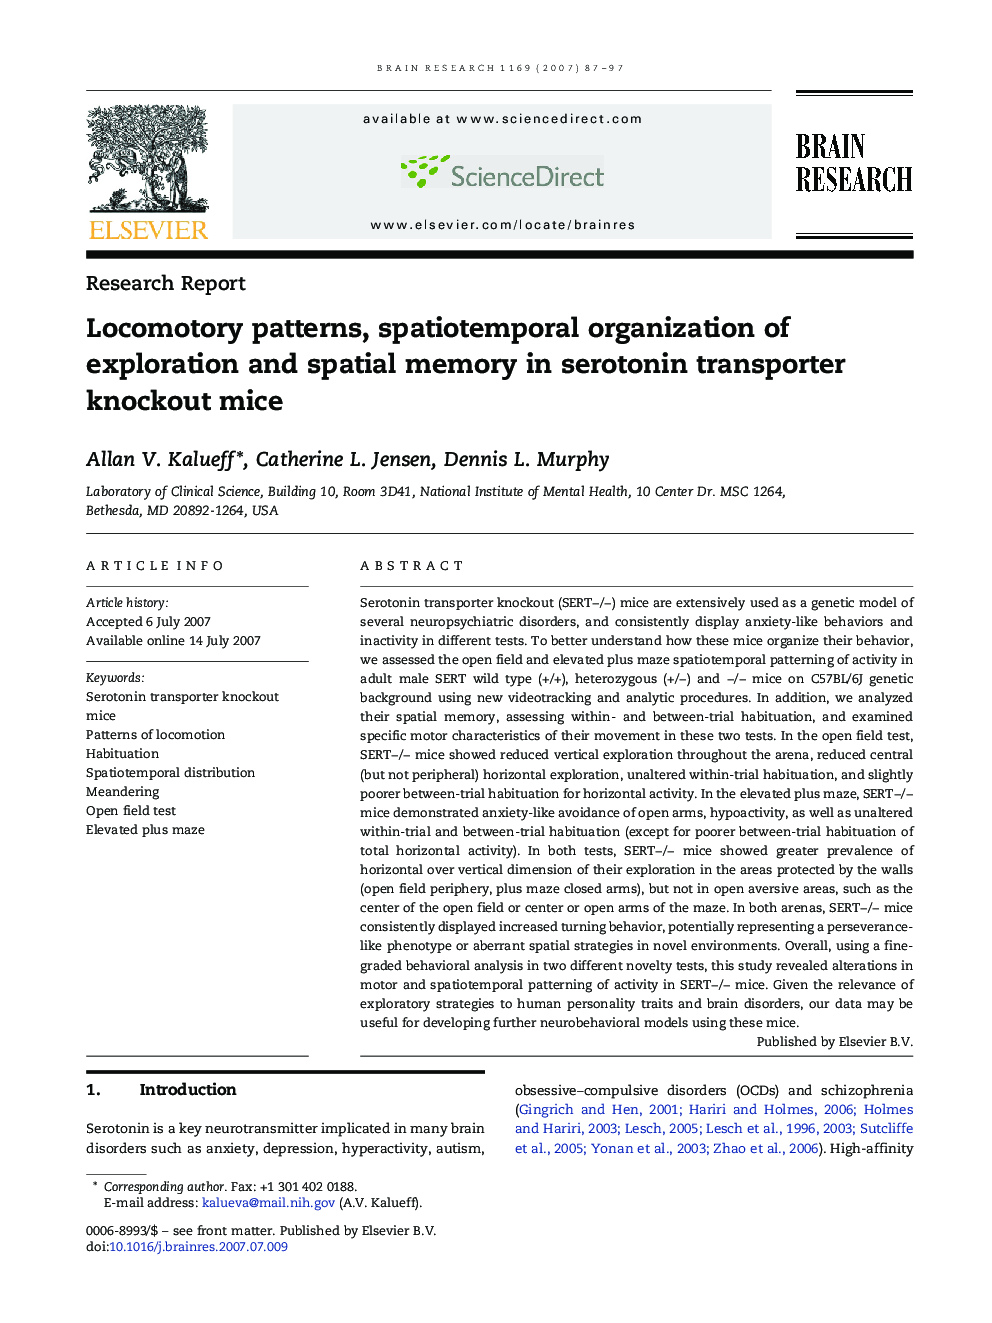 Locomotory patterns, spatiotemporal organization of exploration and spatial memory in serotonin transporter knockout mice